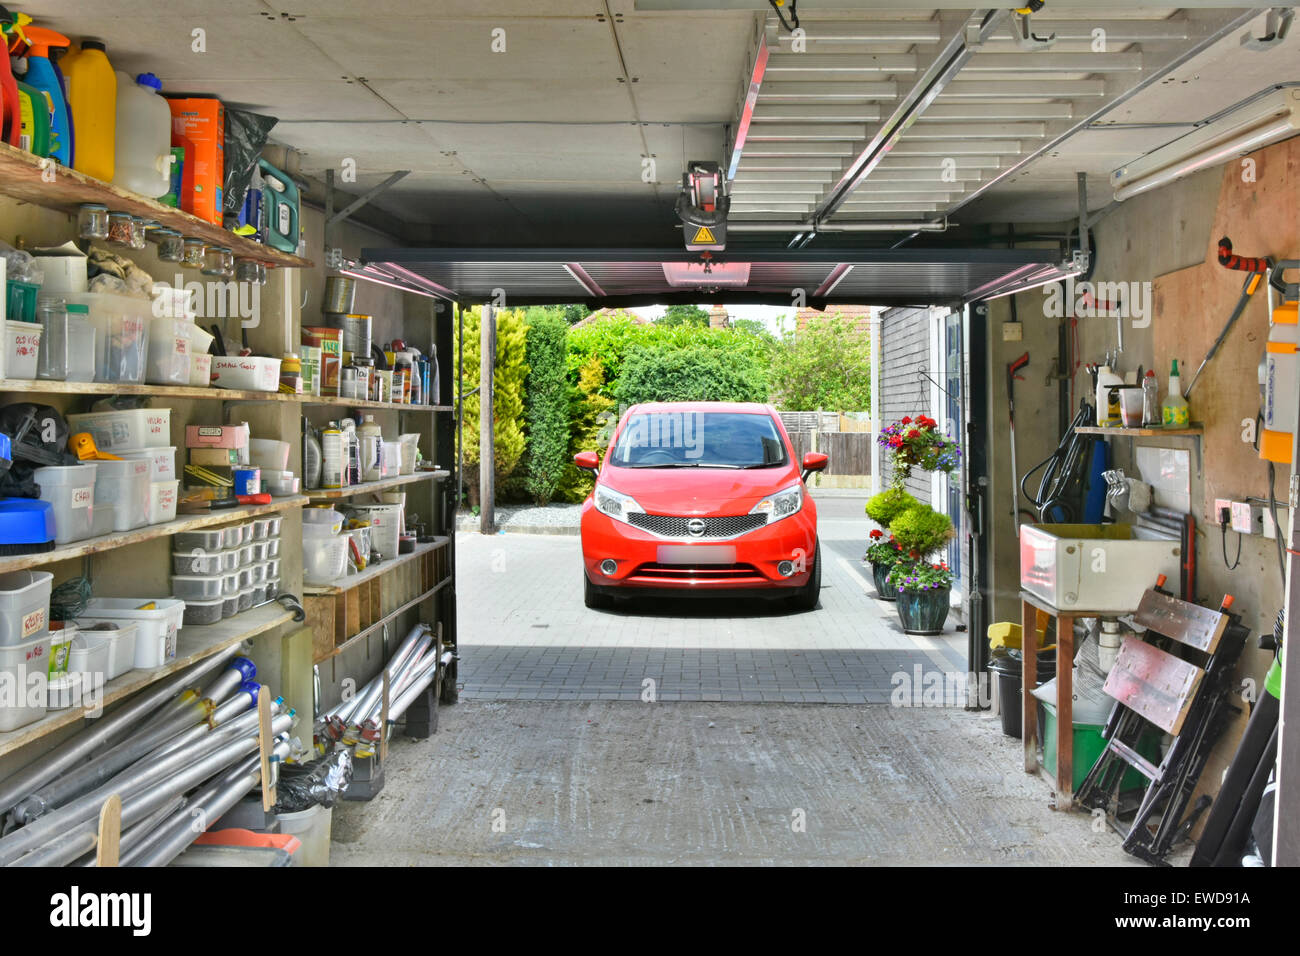 Car on driveway from inside a garage attached to house used for car parking & household storage of paraphernalia tools & garden sundries Essex England Stock Photo